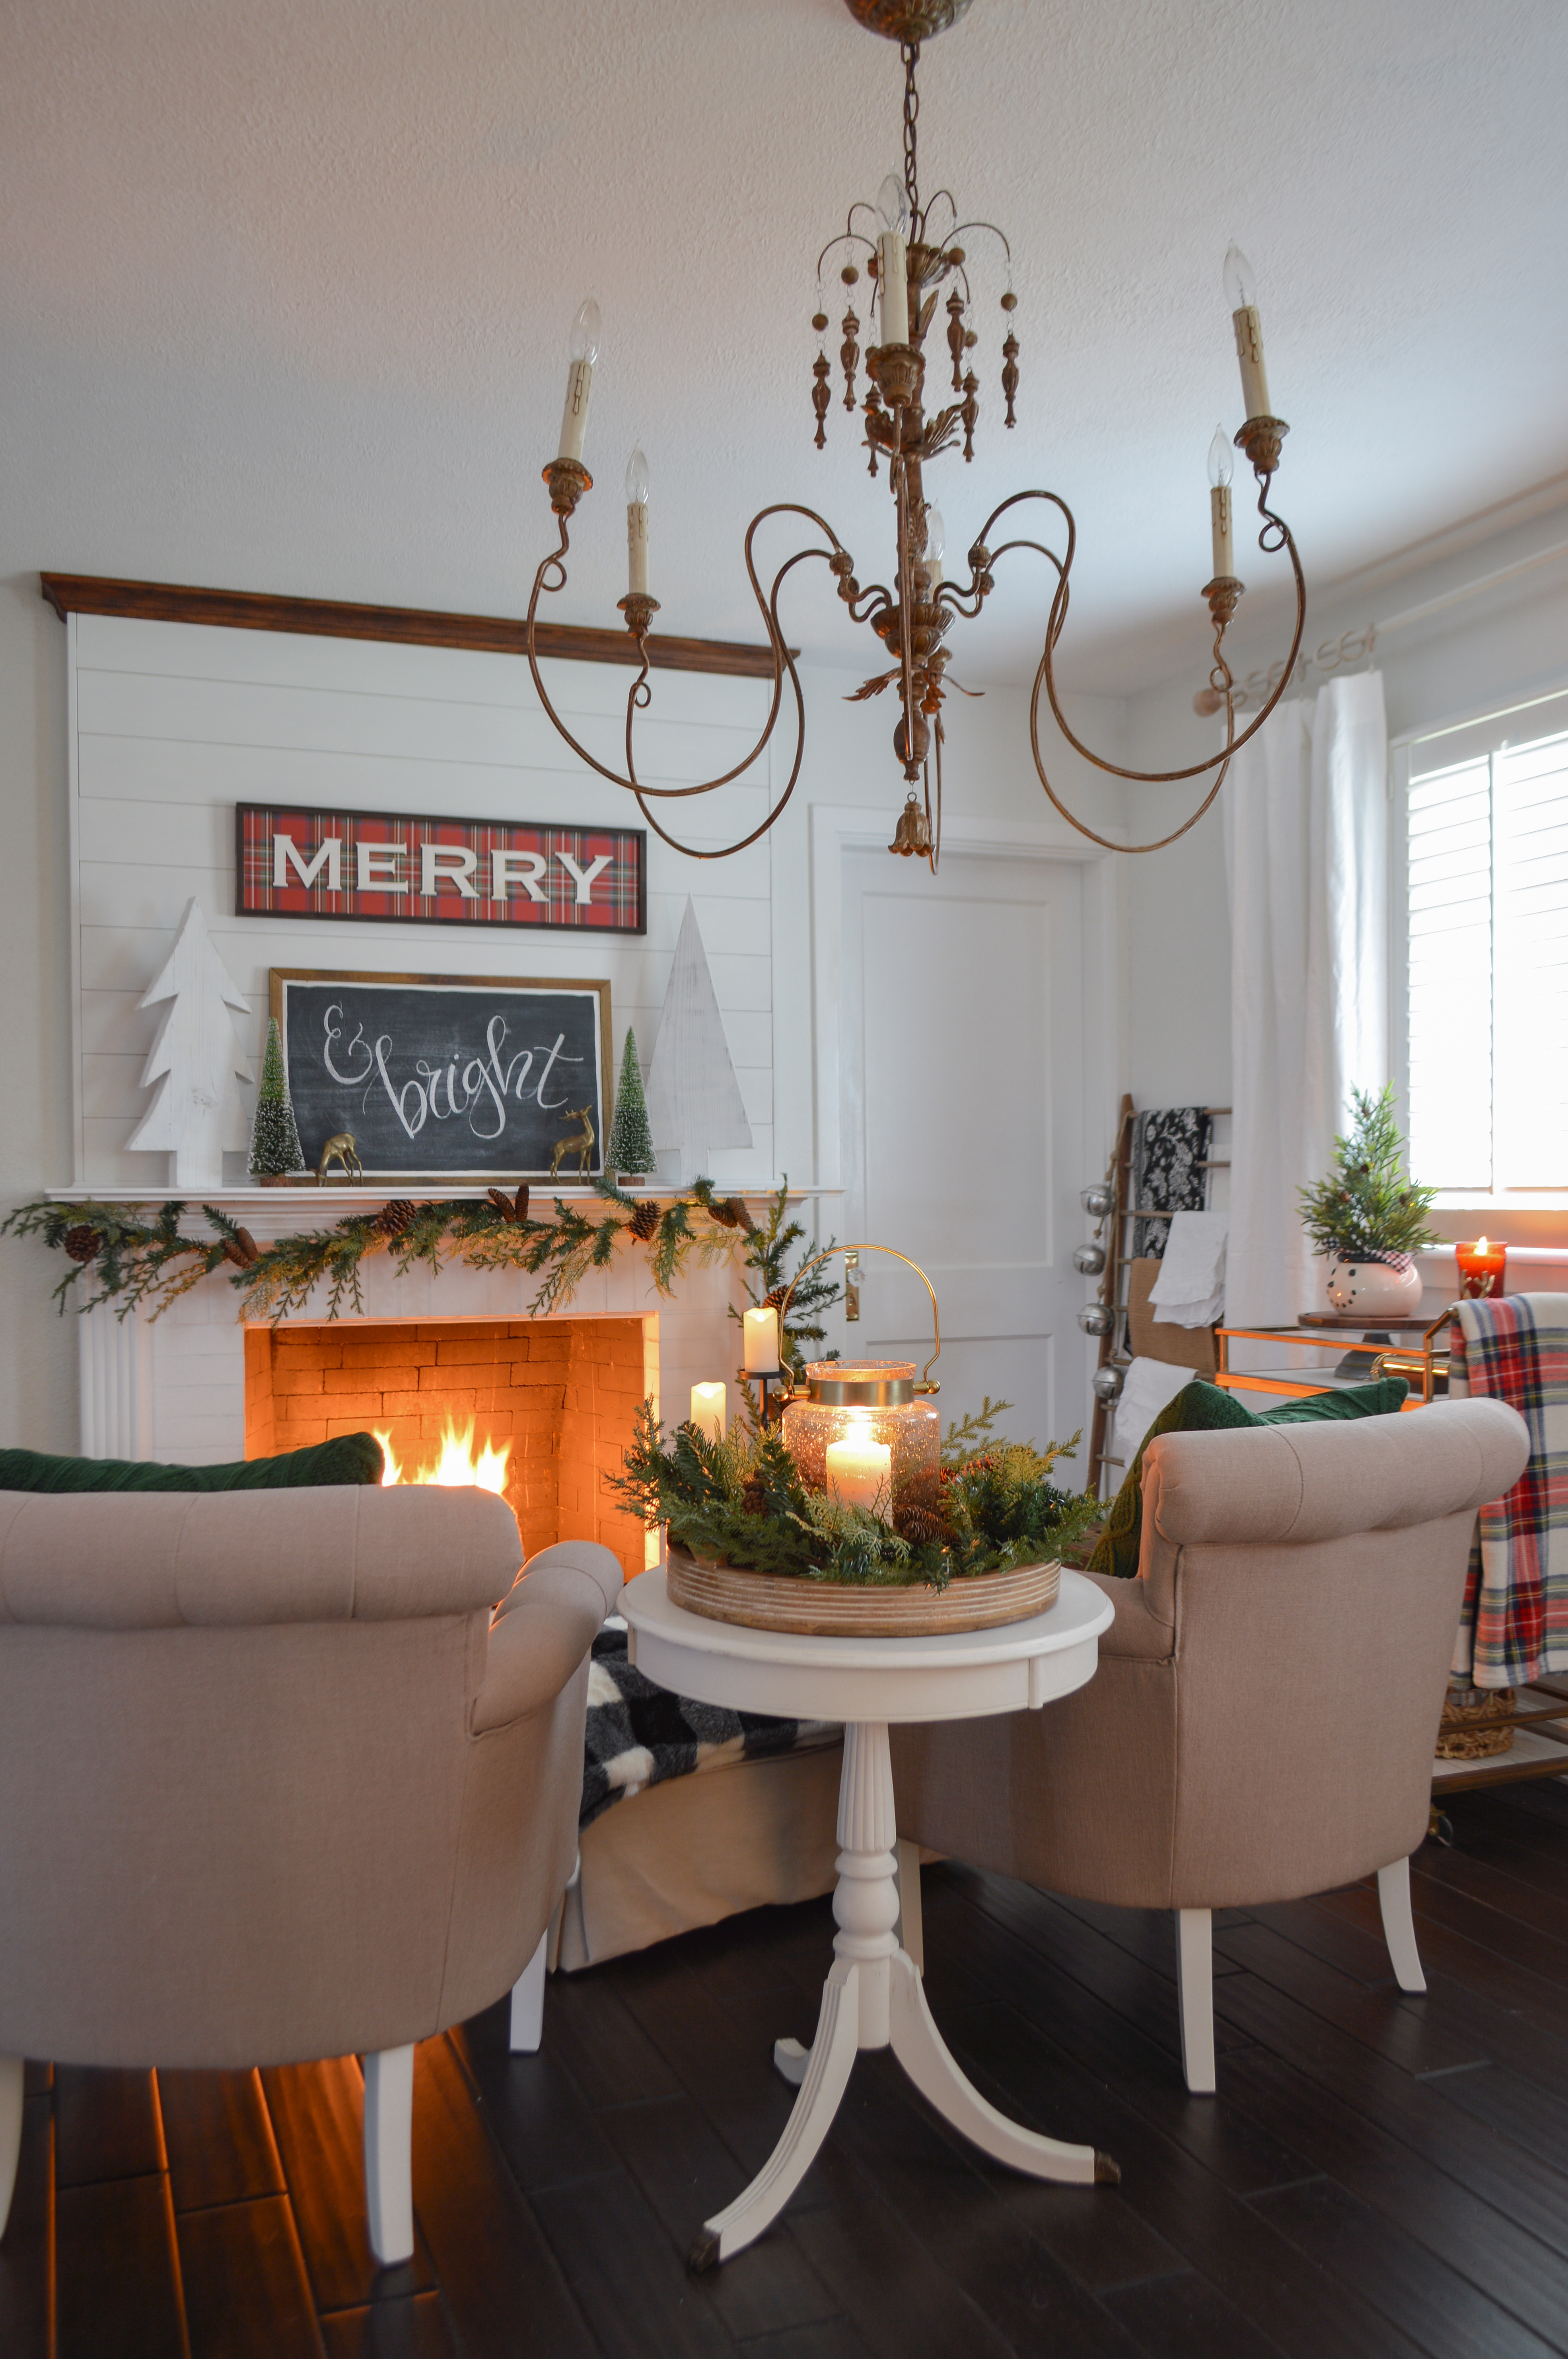 Holiday Housewalk Merry Christmas Home Tour - Cozy seating area, white shiplap fireplace, MERRY plaid and chalkboard signs, french country chandelier. #holidayhousewalk #christmashometour #cozychristmas #cottagechristmas #farmhousechristmas